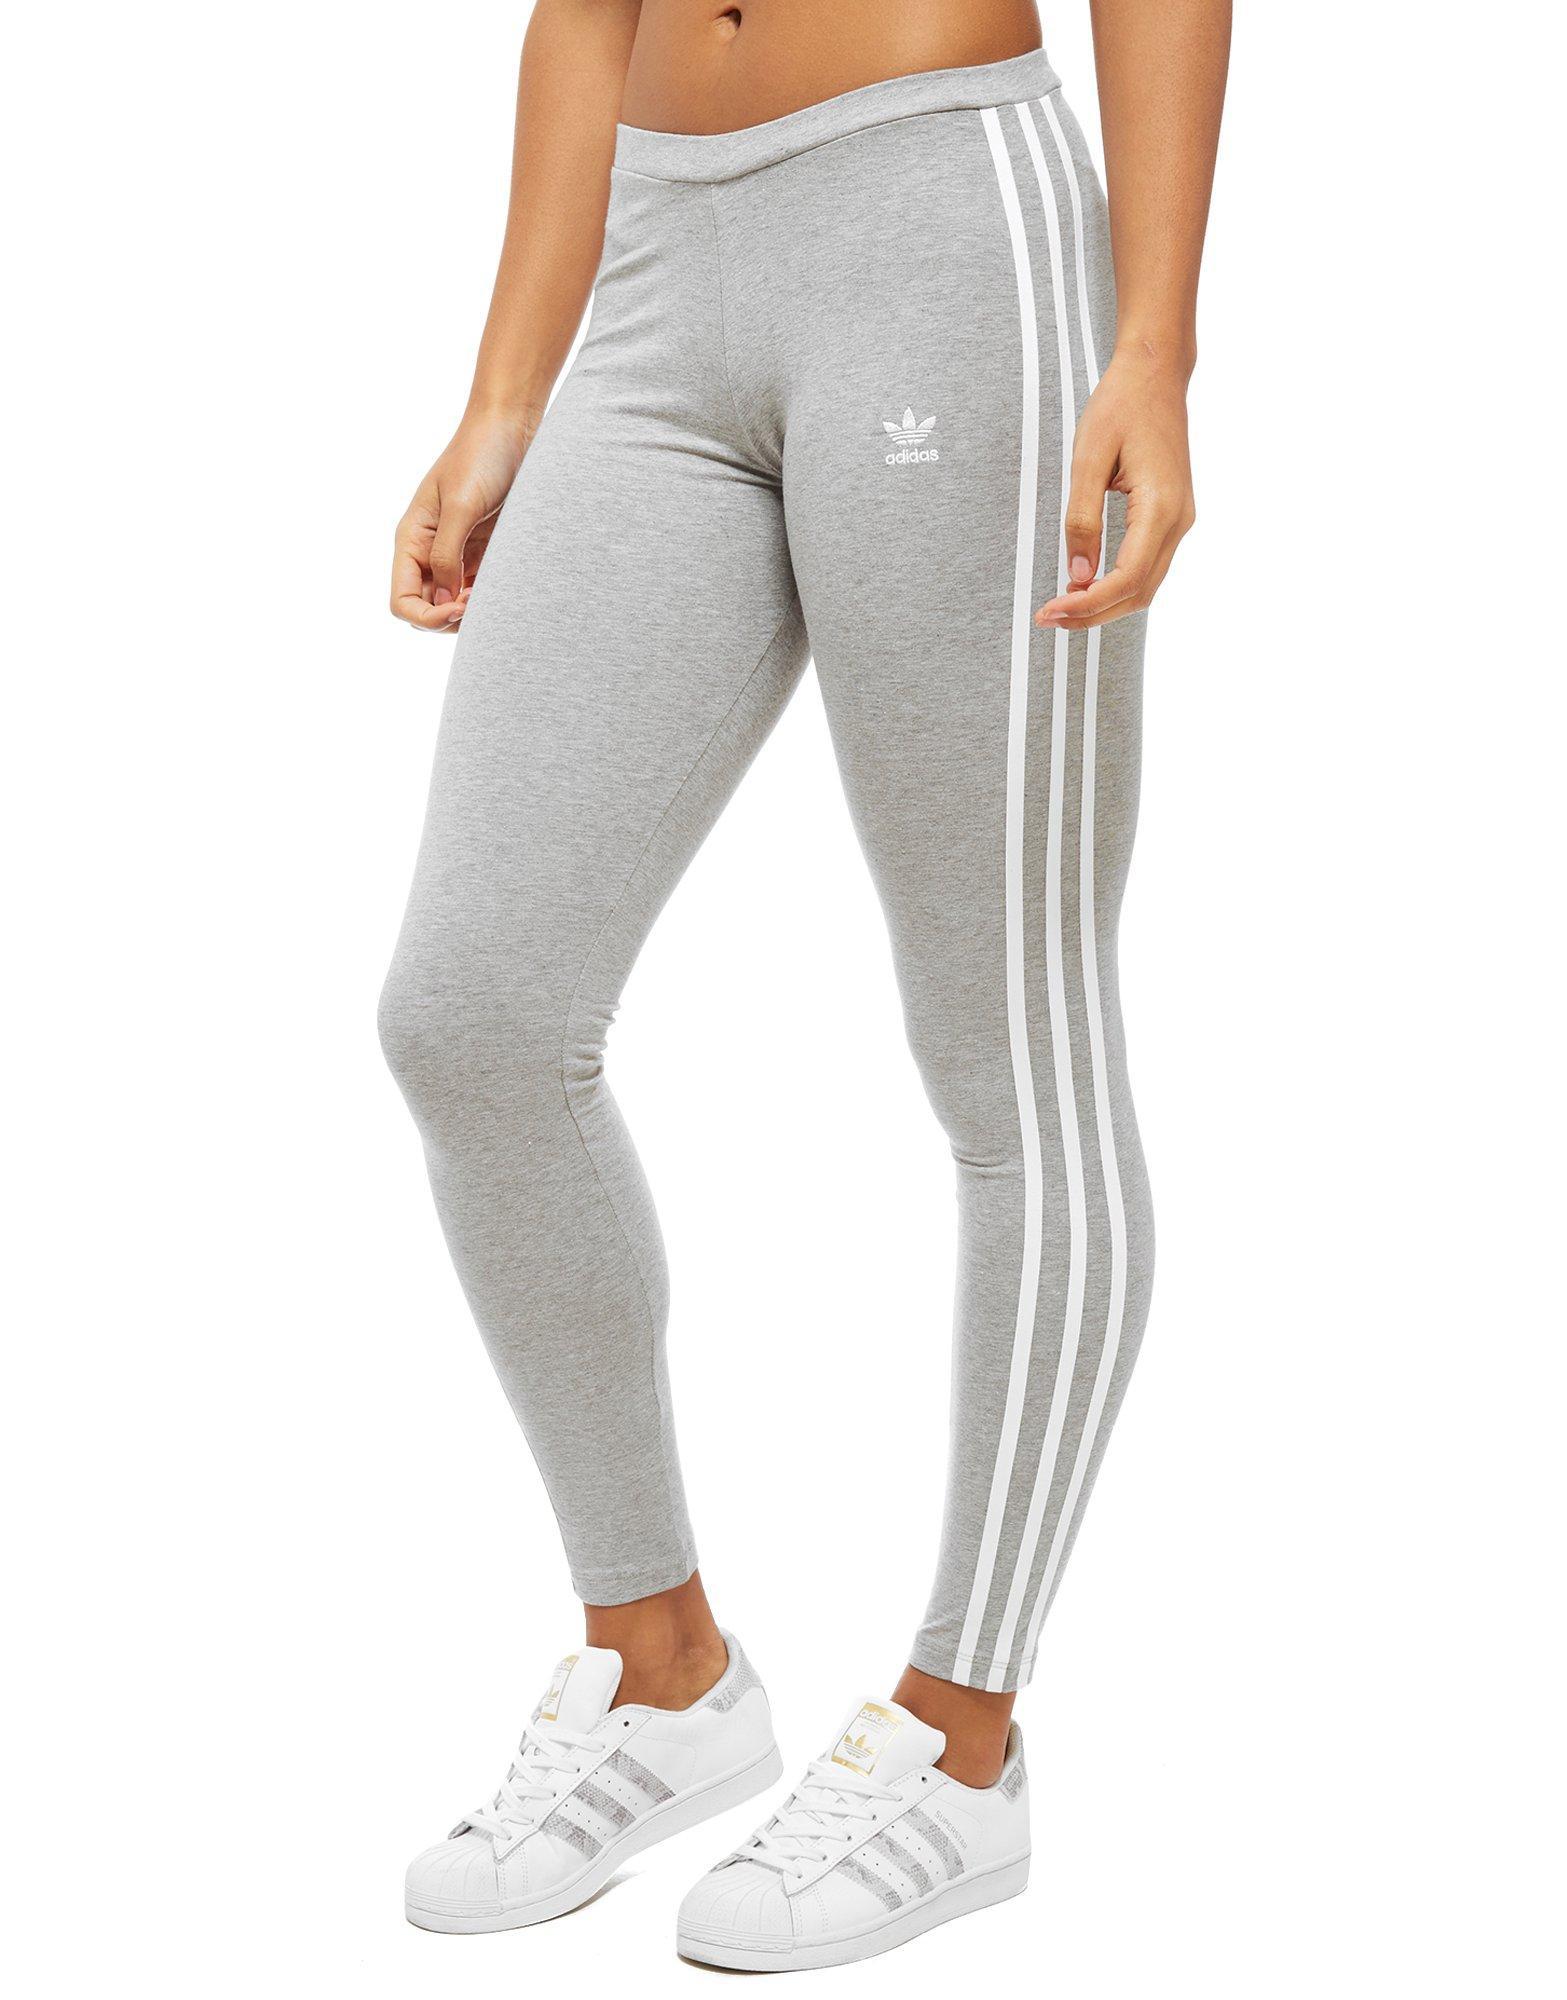 adidas tights grey Online Shopping for Women, Men, Kids Fashion &  Lifestyle|Free Delivery & Returns! -